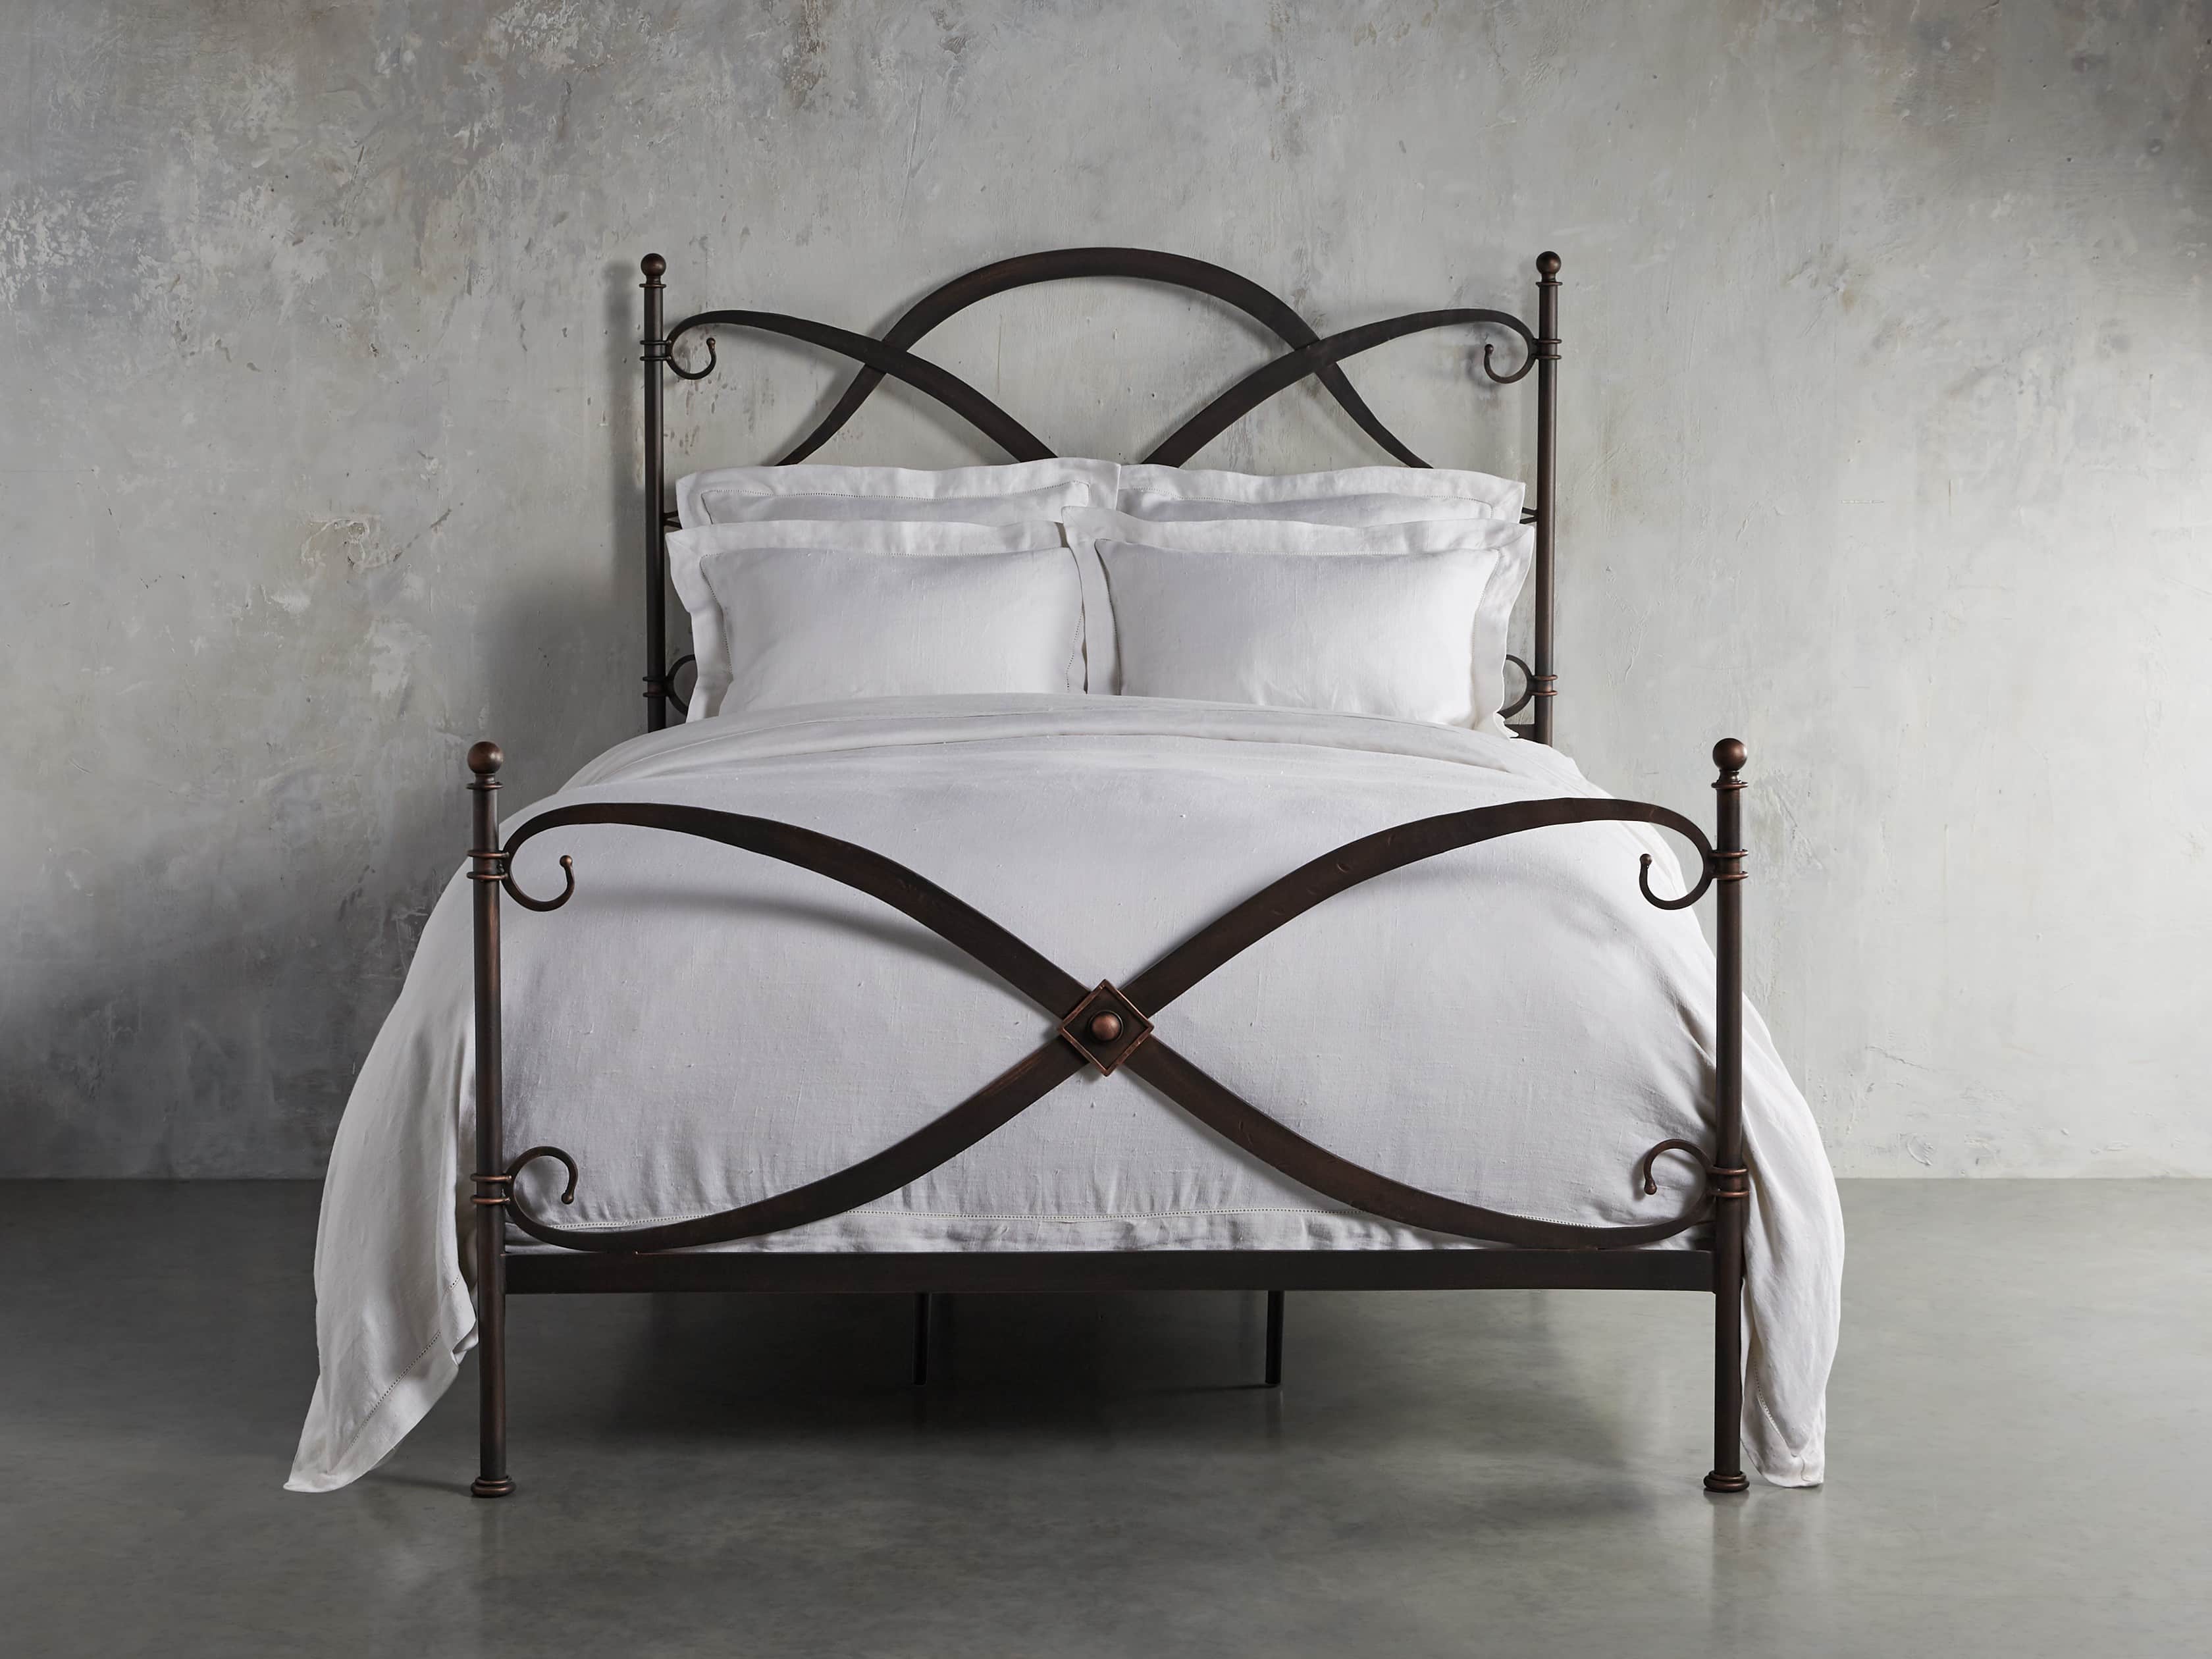 Wrought Iron Bed Frame, Wrought Iron King Size Bed Frame